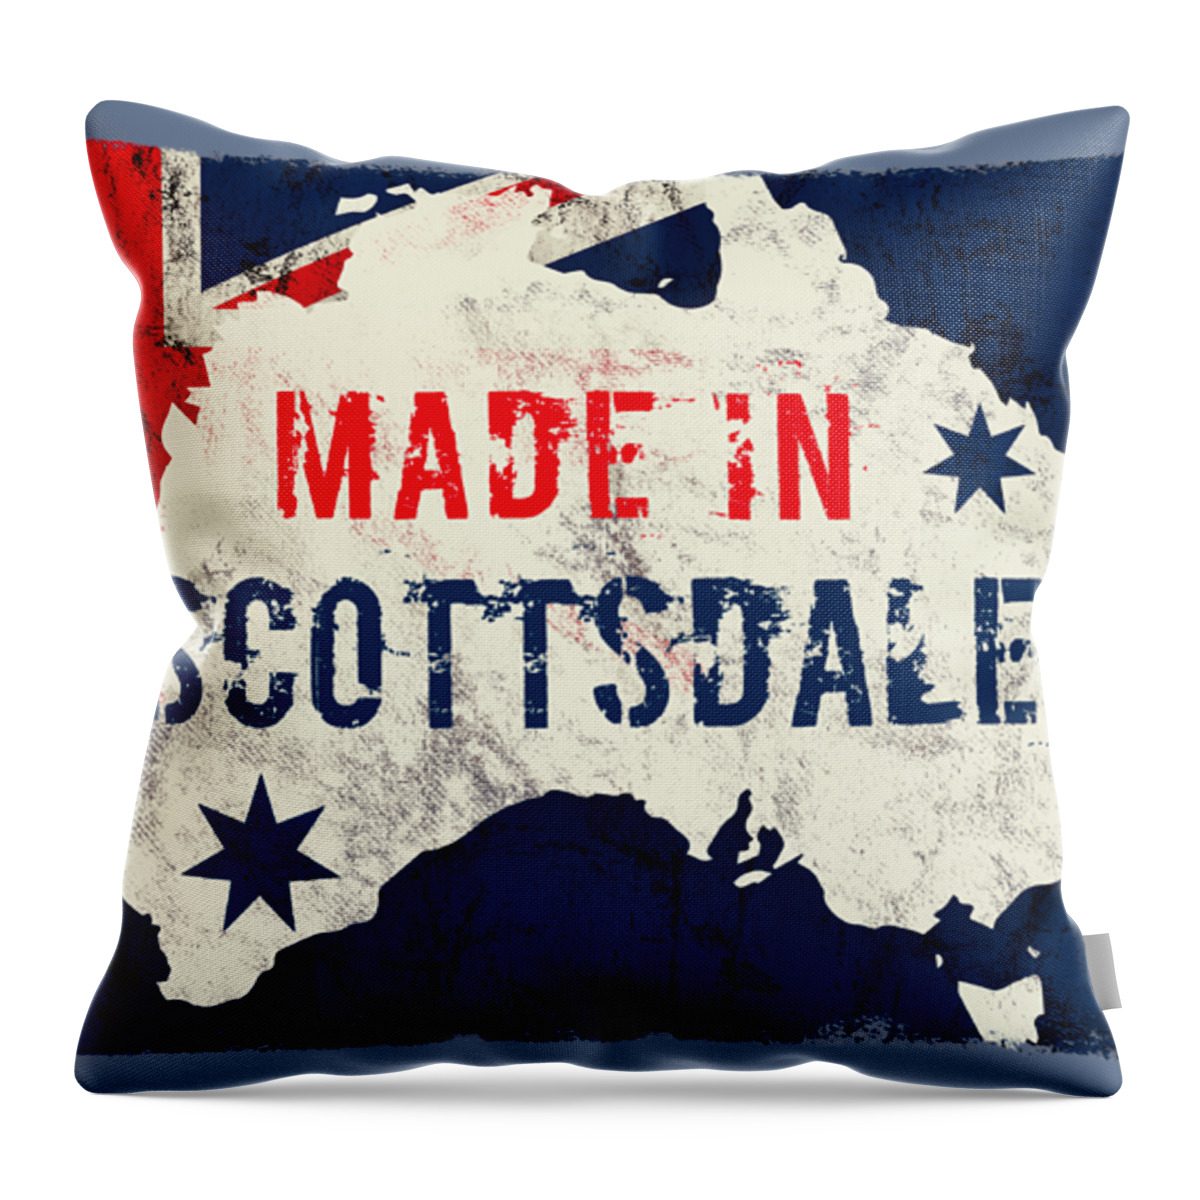 Scottsdale Throw Pillow featuring the digital art Made in Scottsdale, Australia by TintoDesigns